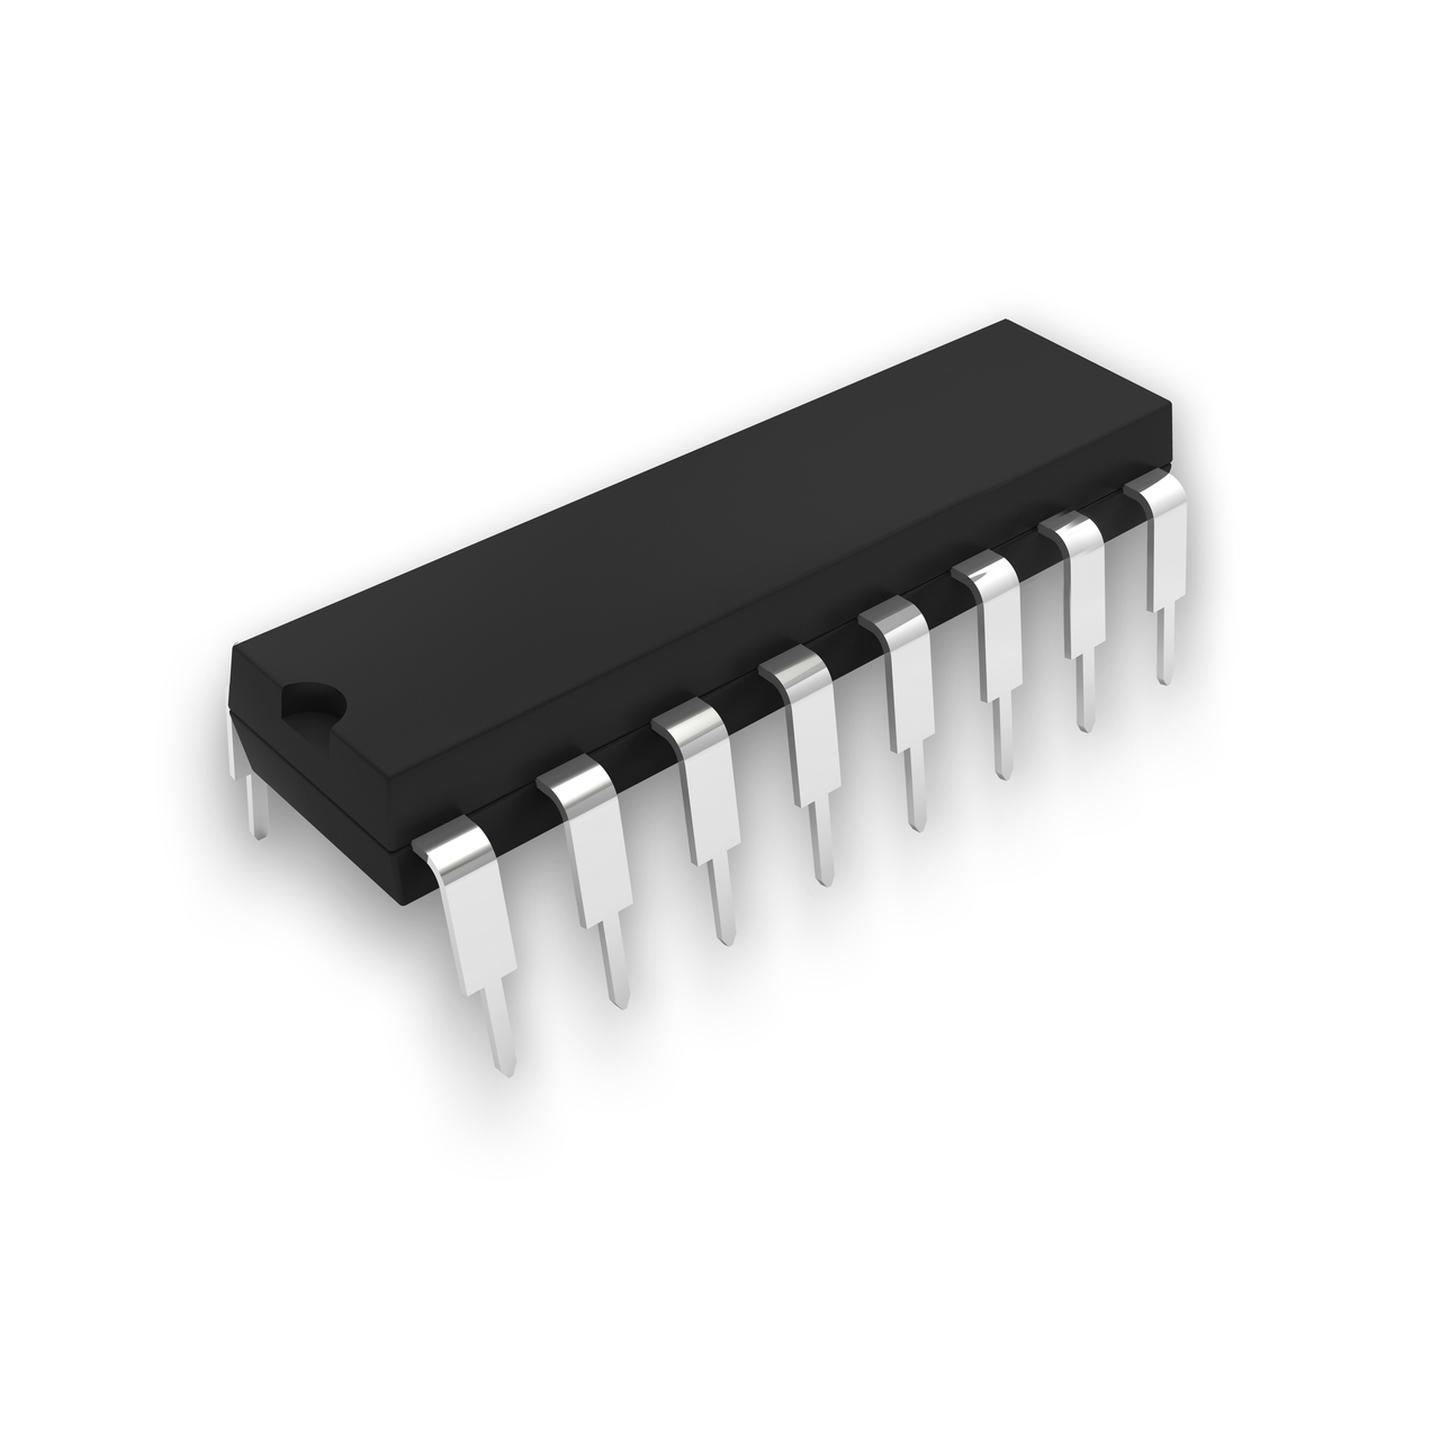 XR2206 Monolithic Function Generator Chip IC